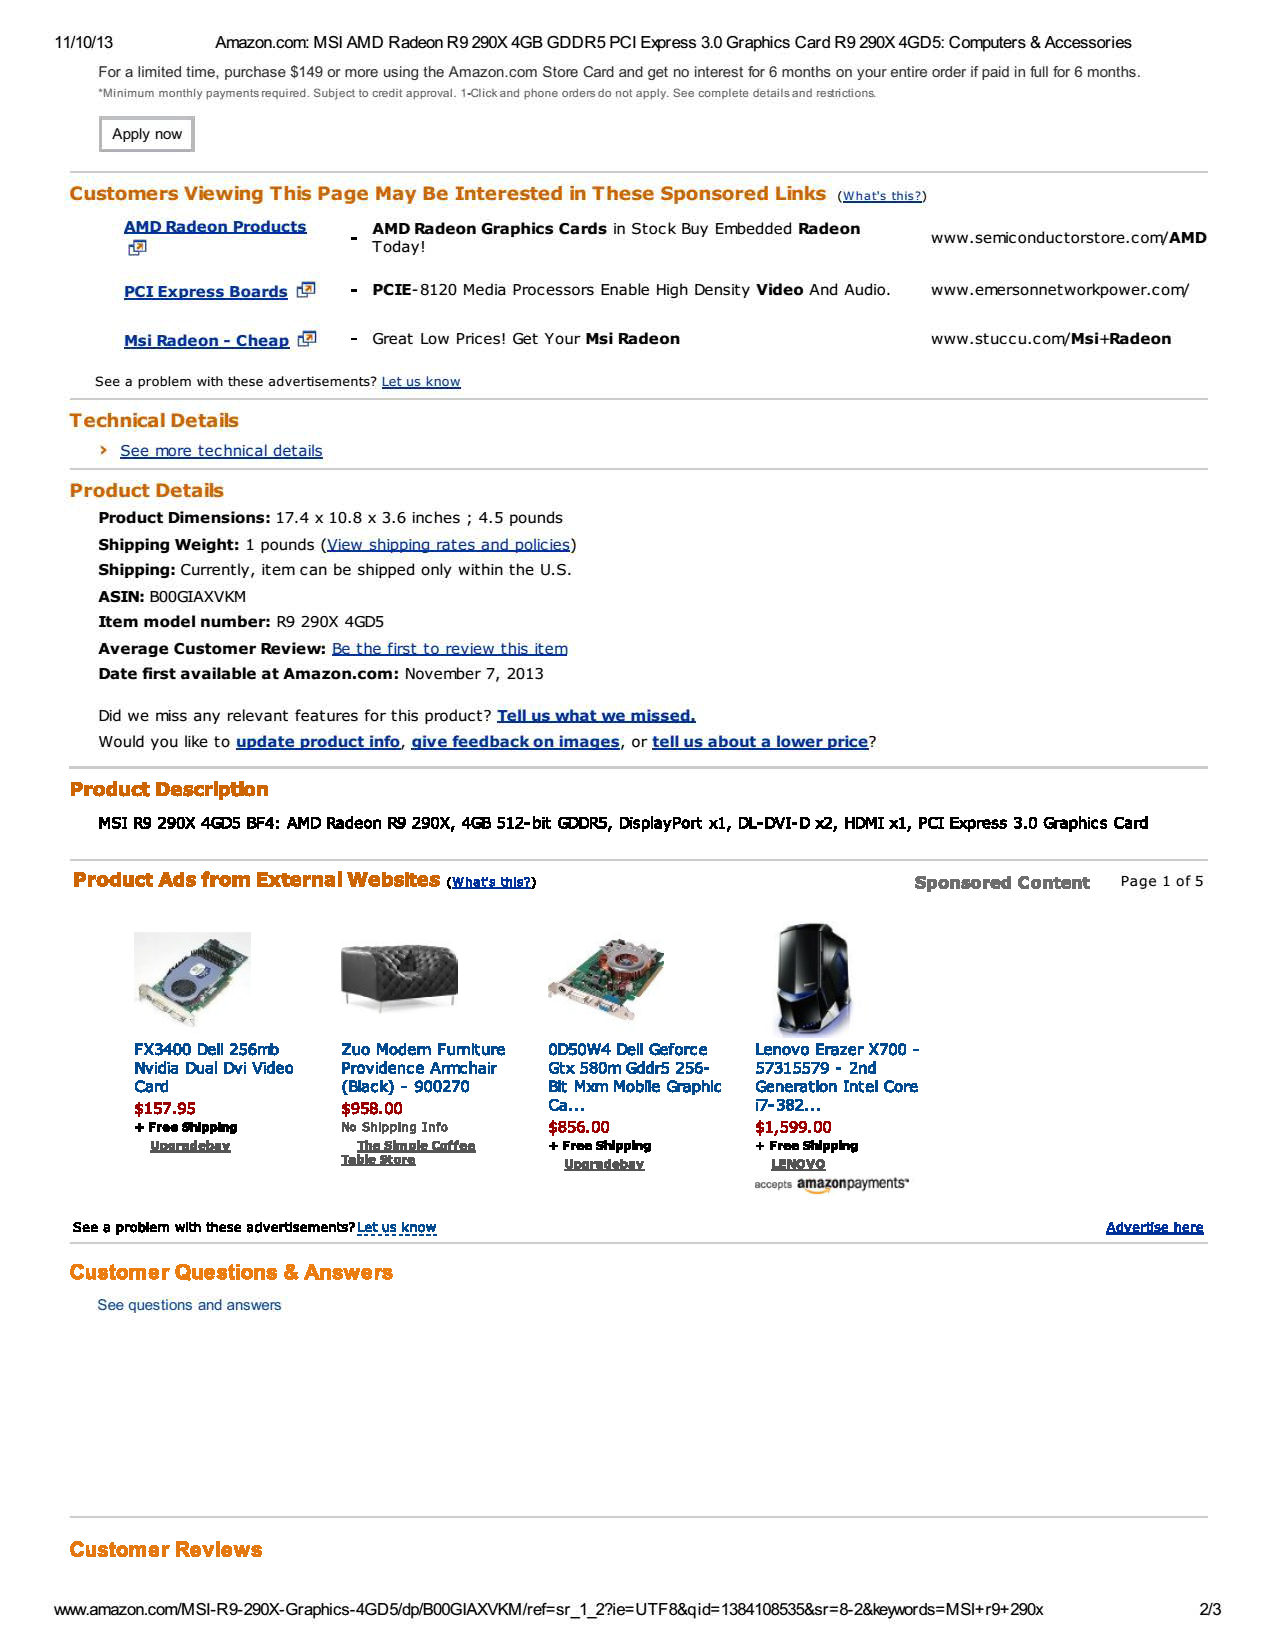 TigerDirect Advertisement on Amazon at time of purchase pg2